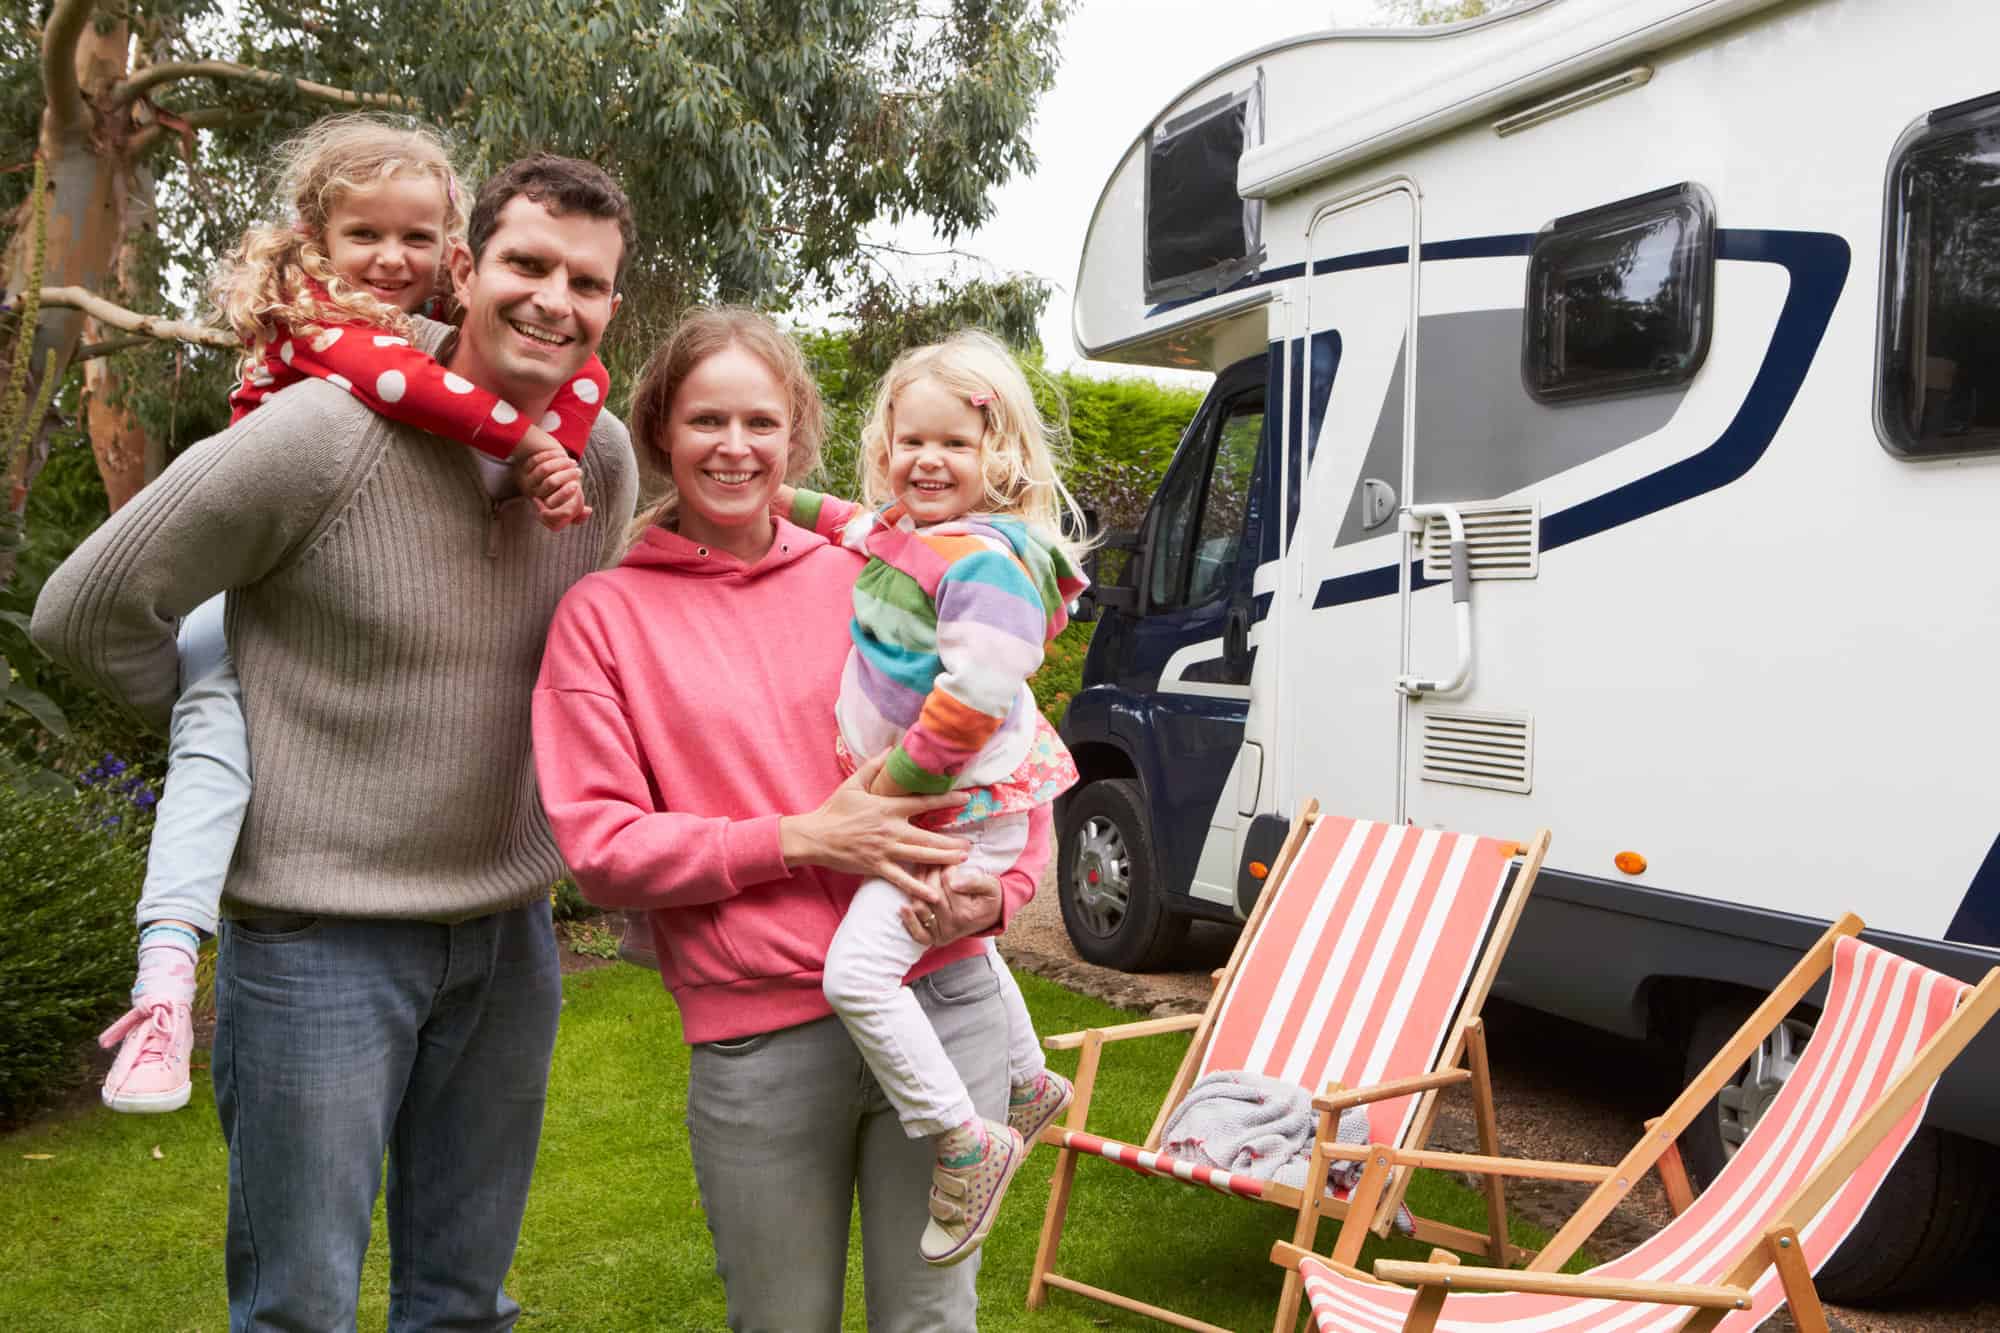 A smiling family poses outside of their RV.